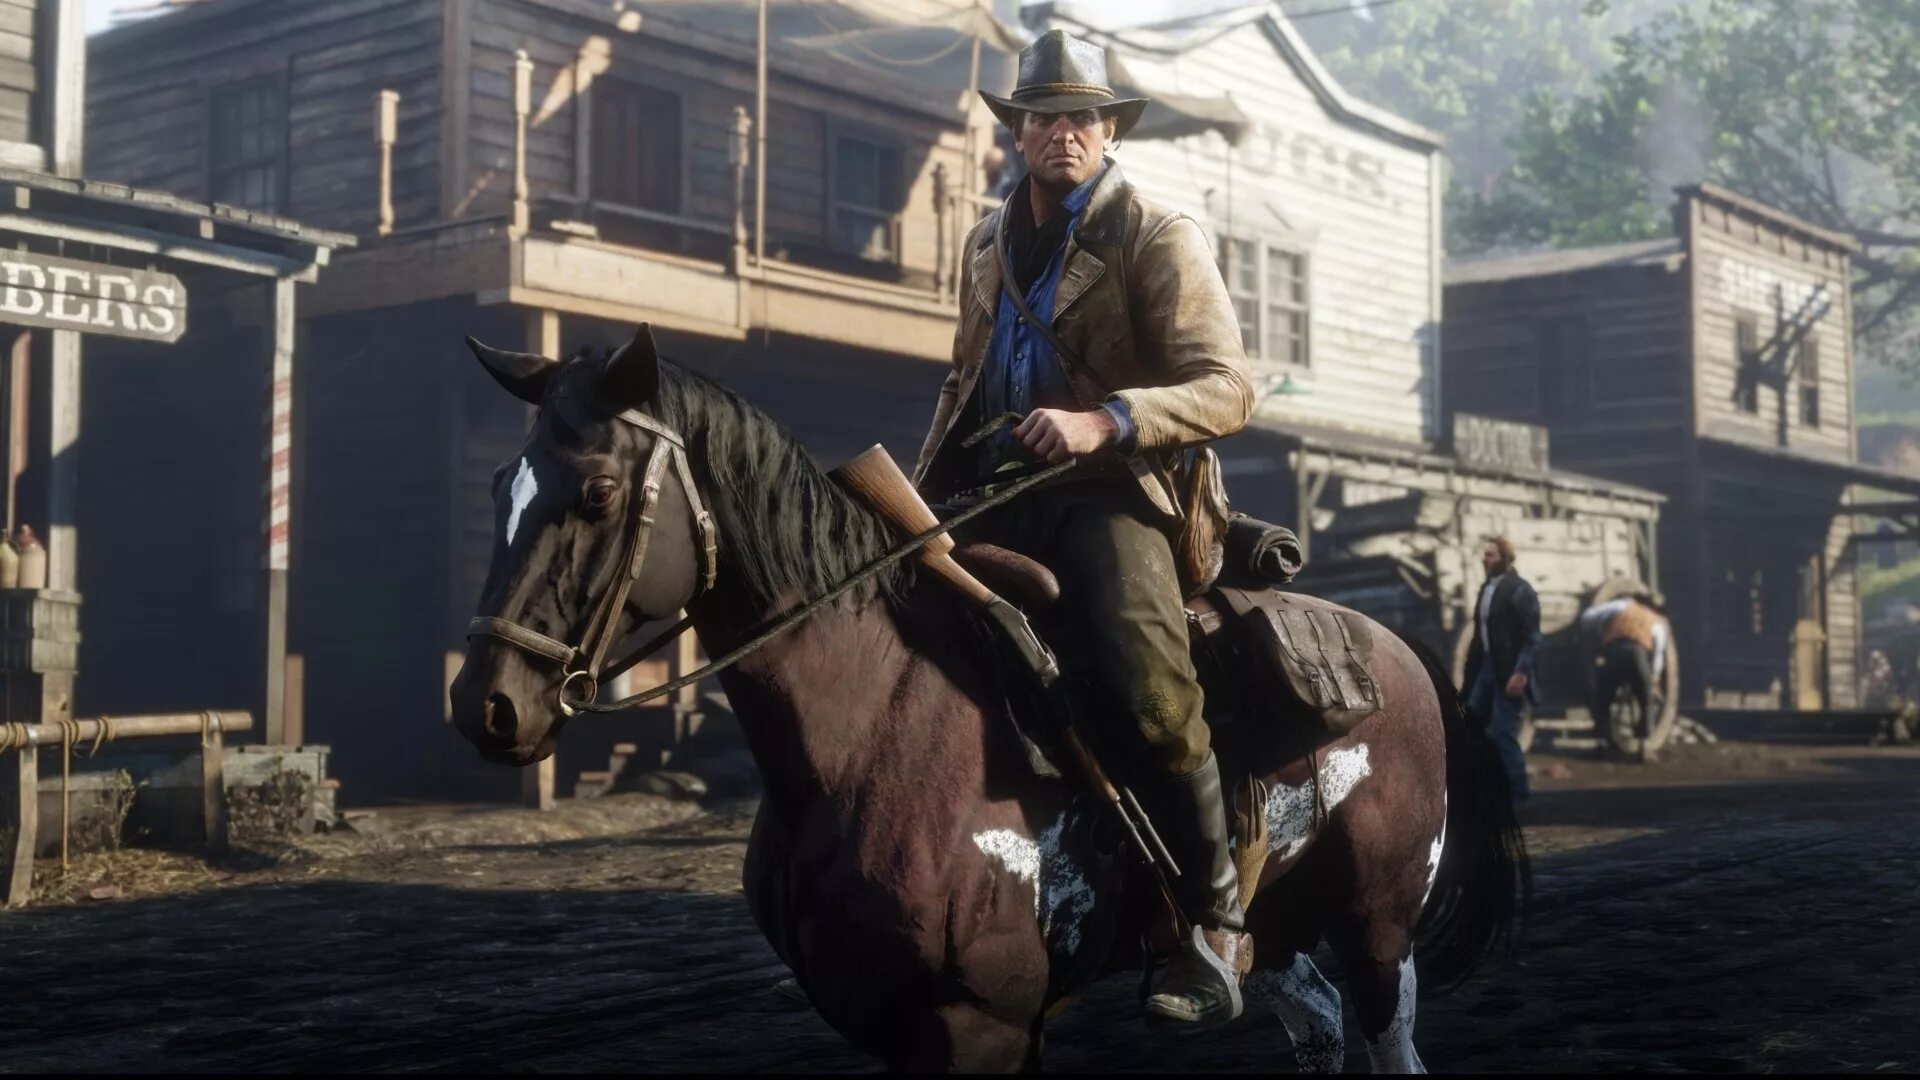 Red dead series. Red Dead Redemption 2. Xbox one Red Dead Redemption 2. Red Dead Redemption 2 Xbox. Red Dead Redemption 2 1.